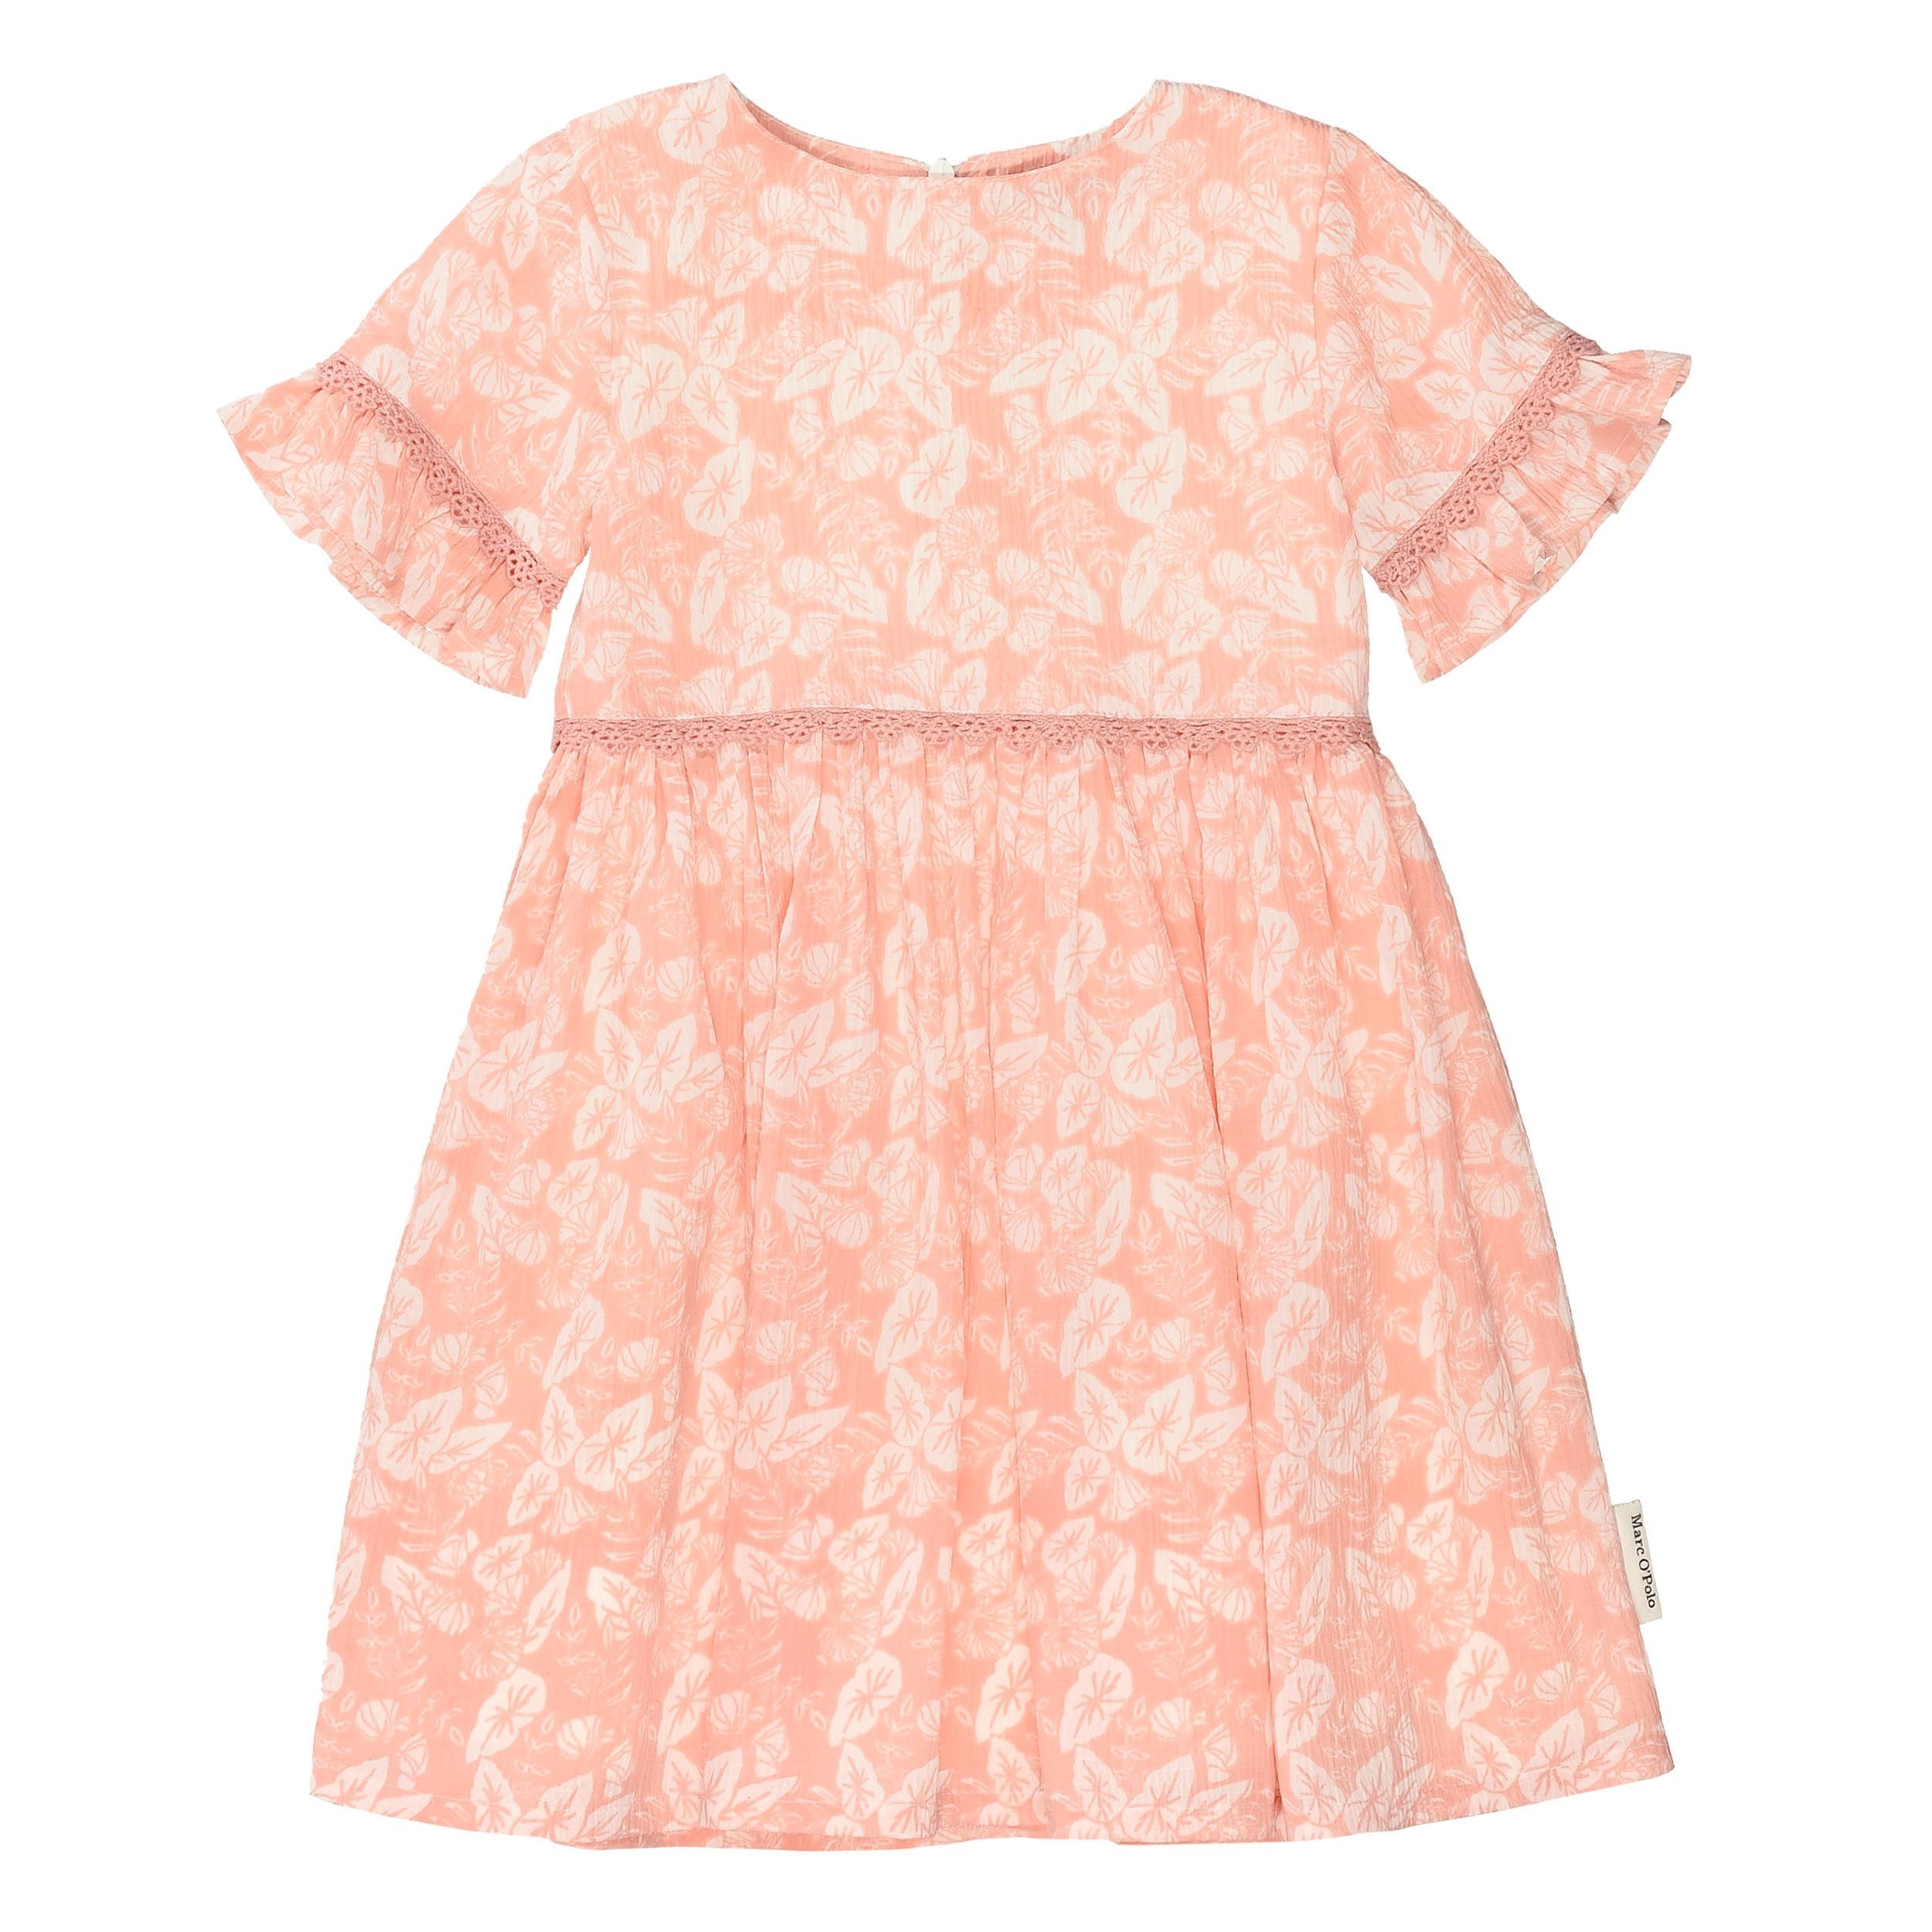 Marc O'Polo Sommerkleid »MARC O'POLO Kleid aus recyceltem Polyester -  Blooming Peach« online kaufen | OTTO